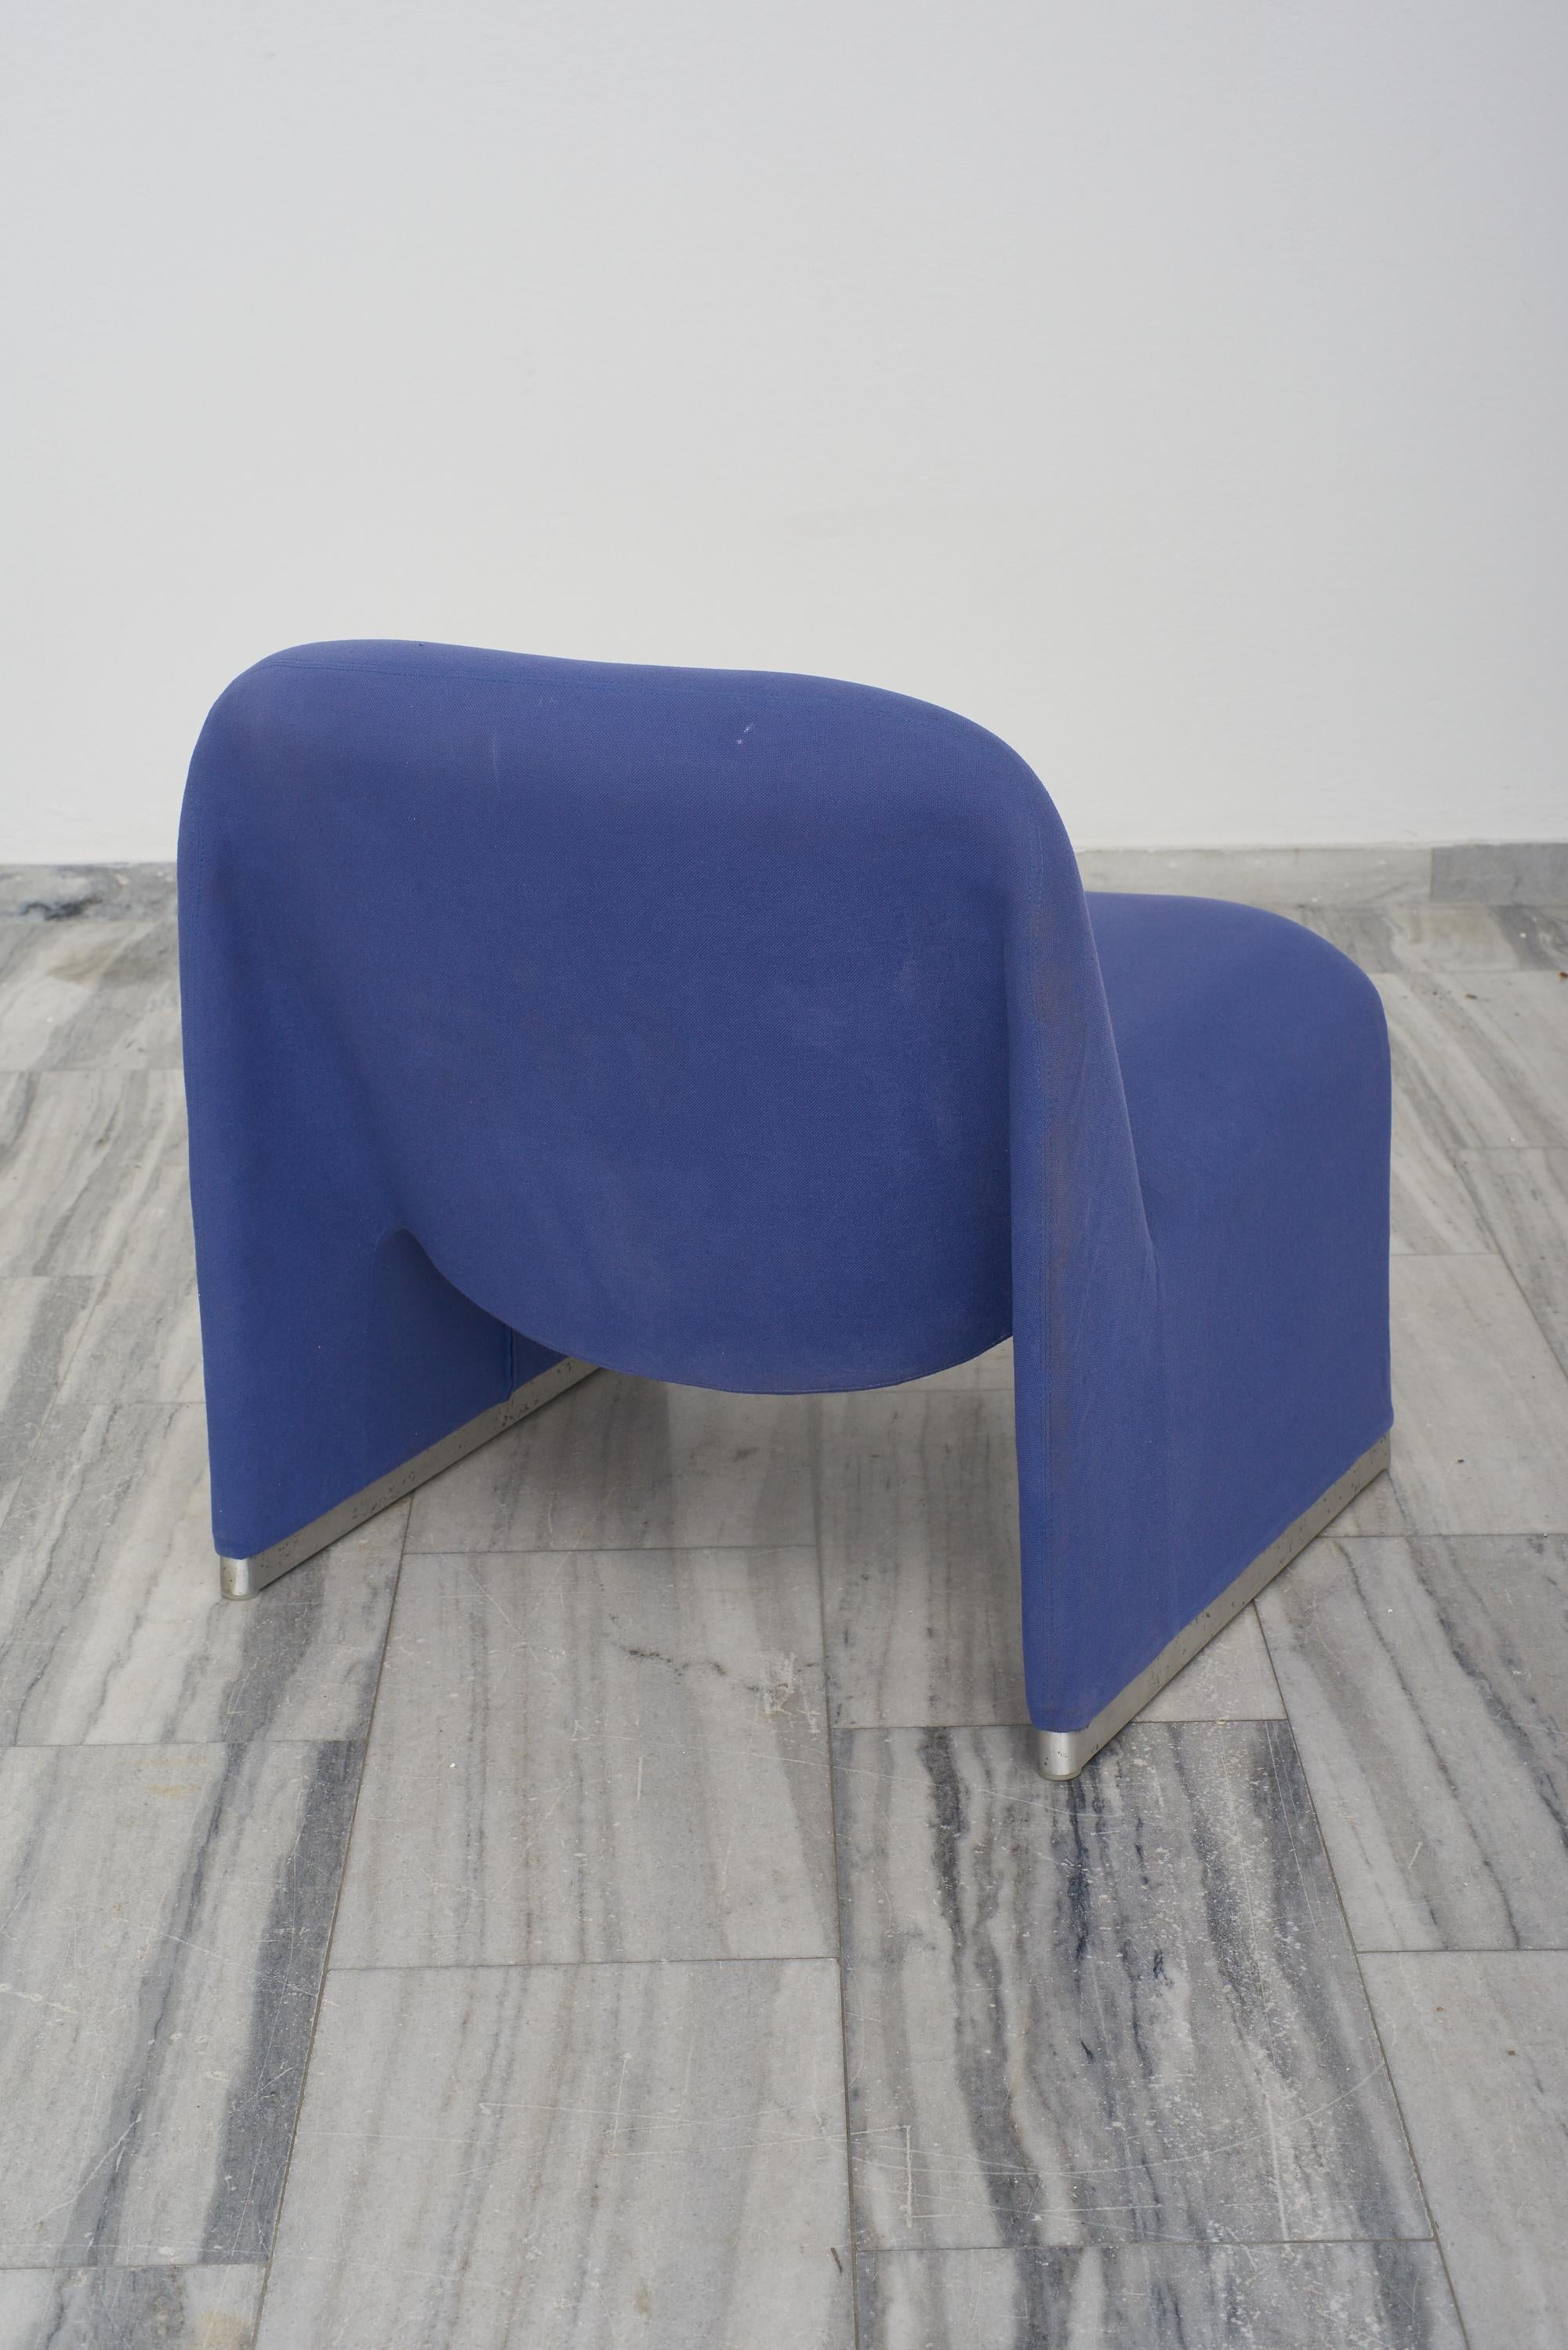 Italian Purple Alky chair by Giancarlo Piretti for Castelli, 1969 For Sale